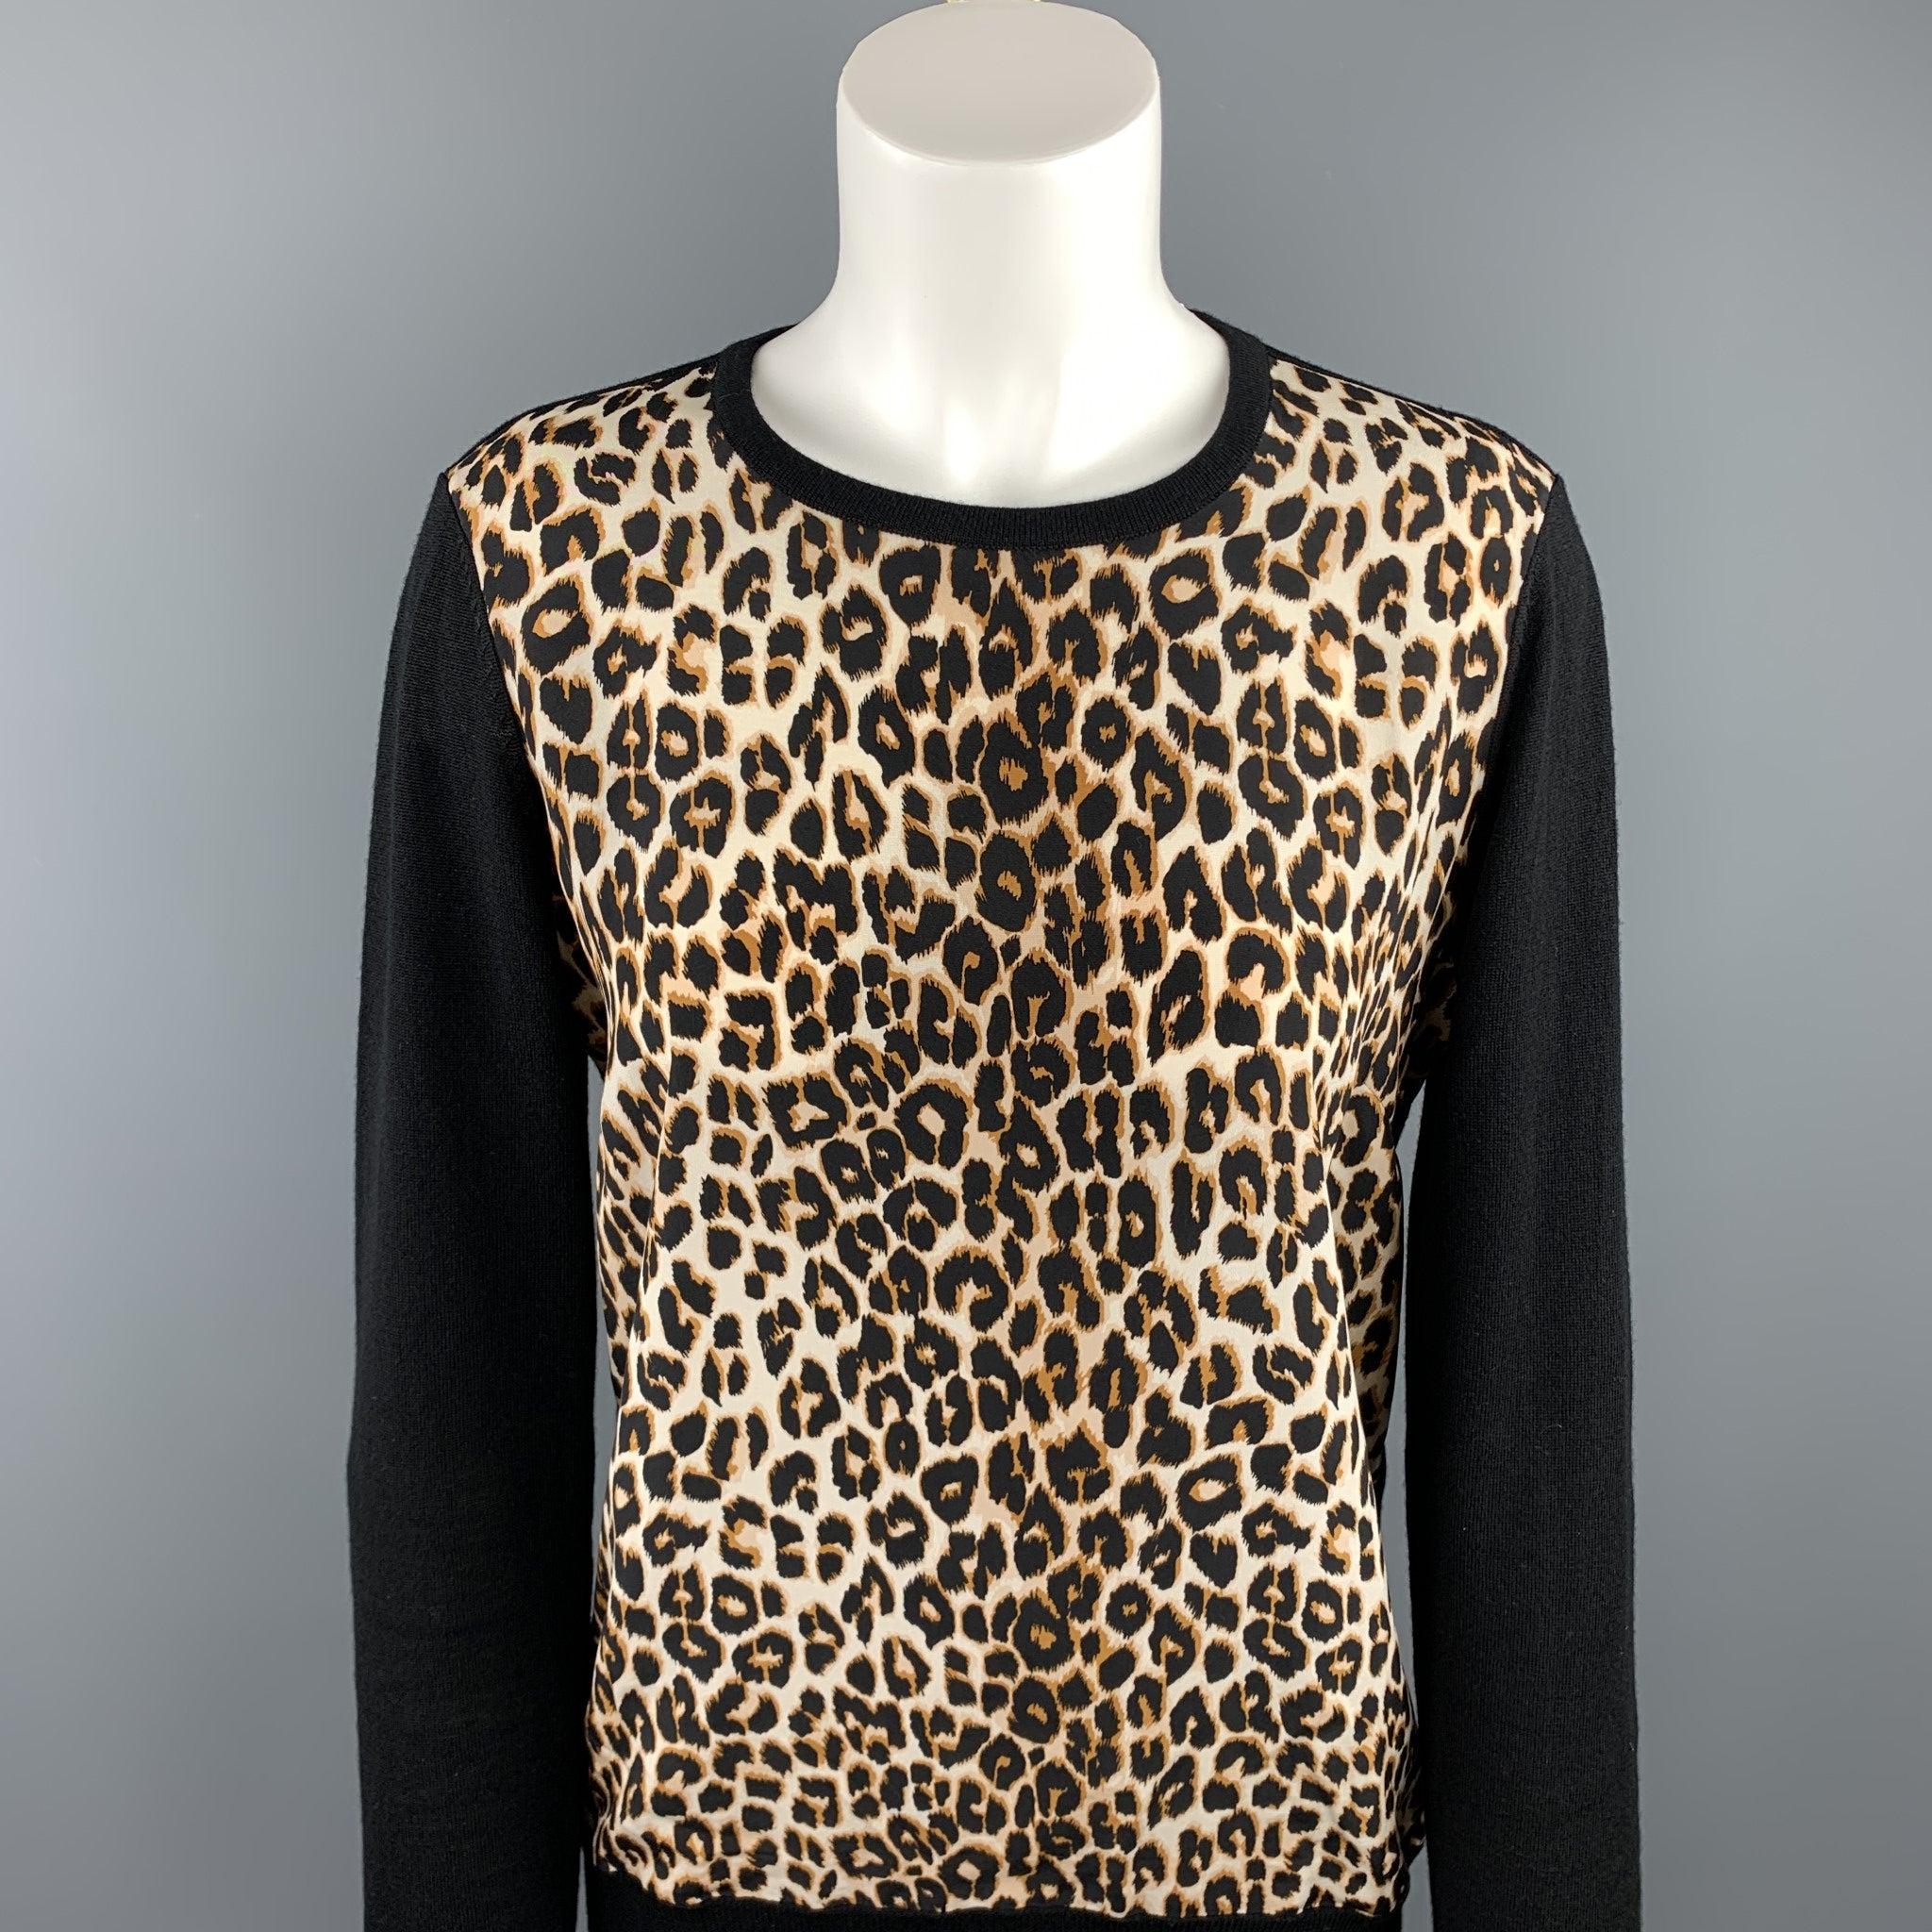 EQUIPMENT FEMME pullover comes in a black & tan leopard wool / silk featuring a crew-neck.Excellent Pre-Owned Condition. 

Marked:   M 

Measurements: 
 
Shoulder: 17 inches 
Bust: 40 inches 
Sleeve: 26.5 inches 
Length: 25 inches 

  
  
